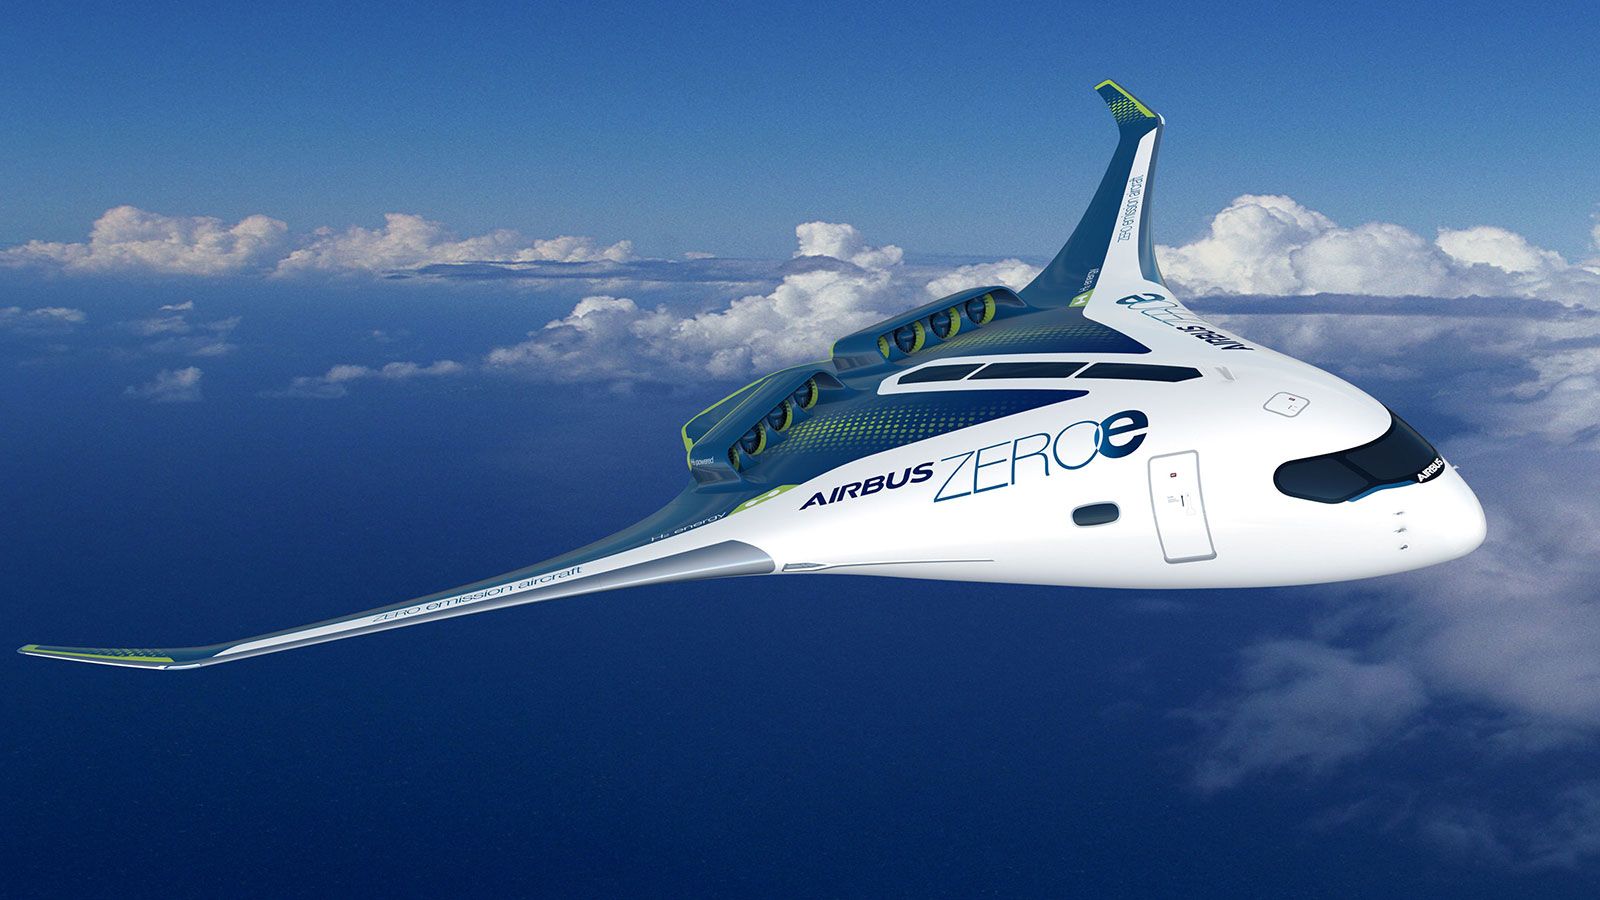 Skydweller is just one a number of aircraft being developed that can operate without using fossil fuels. ZEROe is a <a href="index.php?page=&url=https%3A%2F%2Fedition.cnn.com%2Ftravel%2Farticle%2Fairbus-zero-emissions-concept-plane%2Findex.html" target="_blank">zero-emission concept aircraft from Airbus</a>.